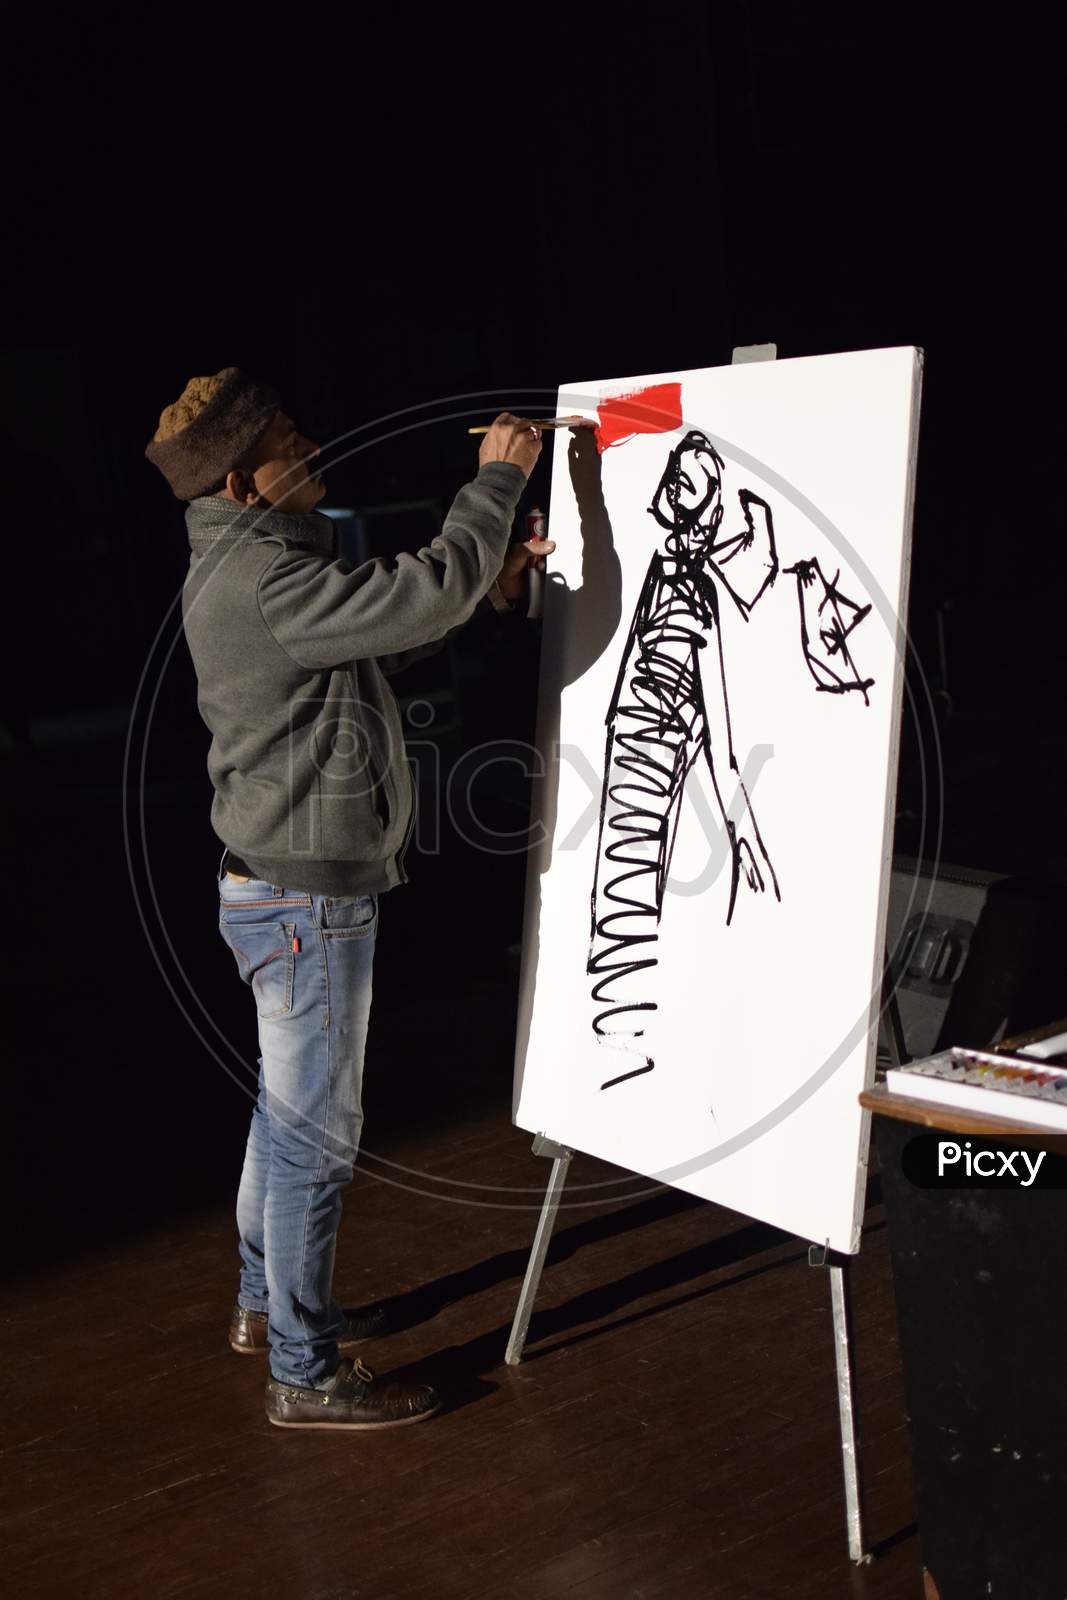 An artist performing live sketch